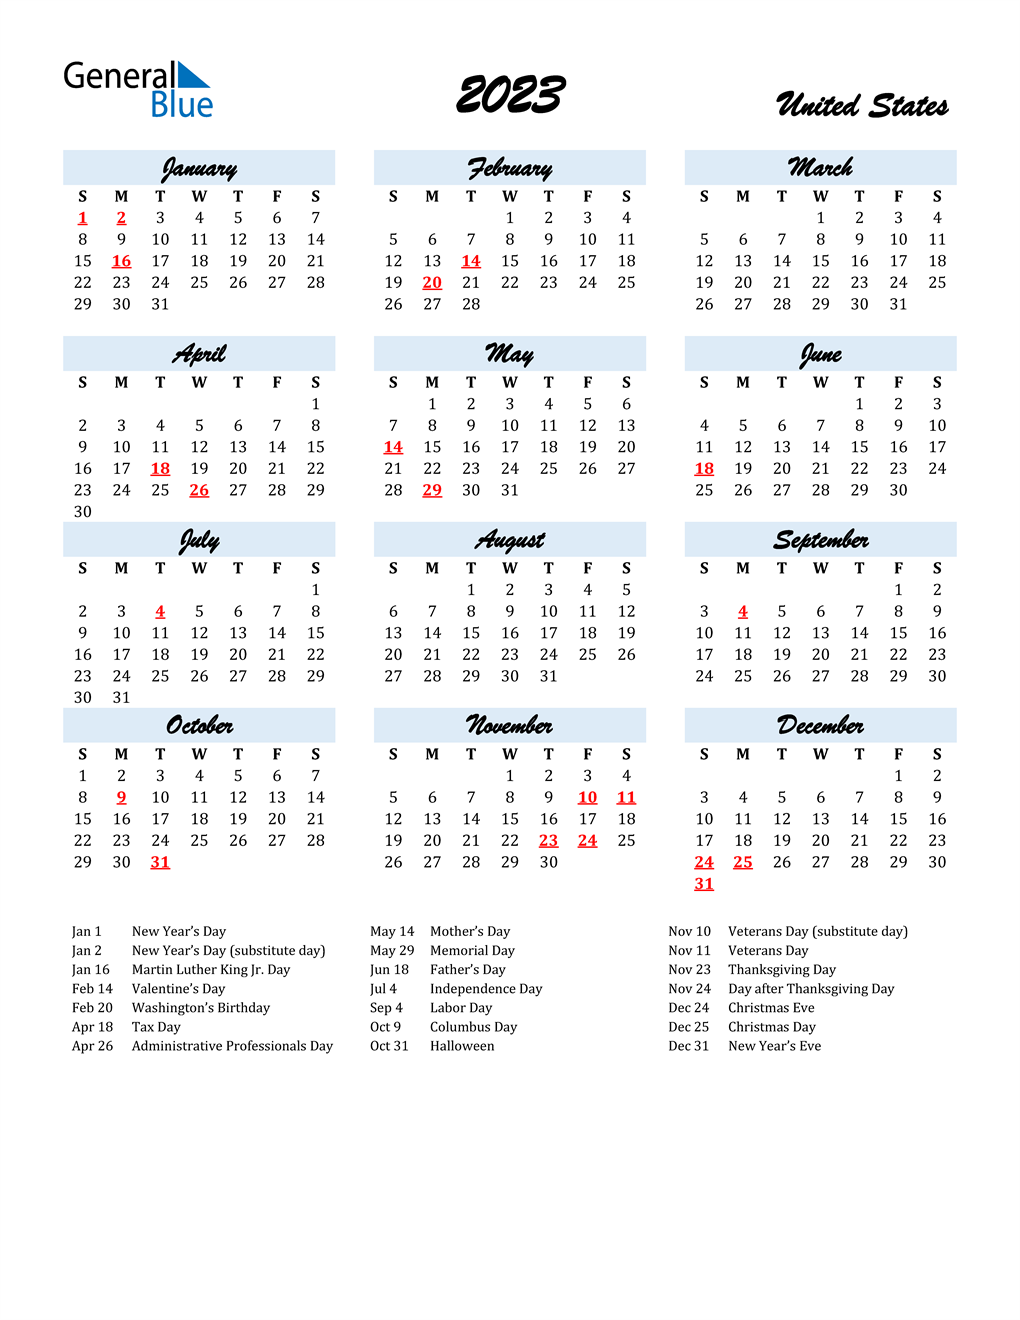 2022 yearly calendar 2023 united states calendar with holidays Troy